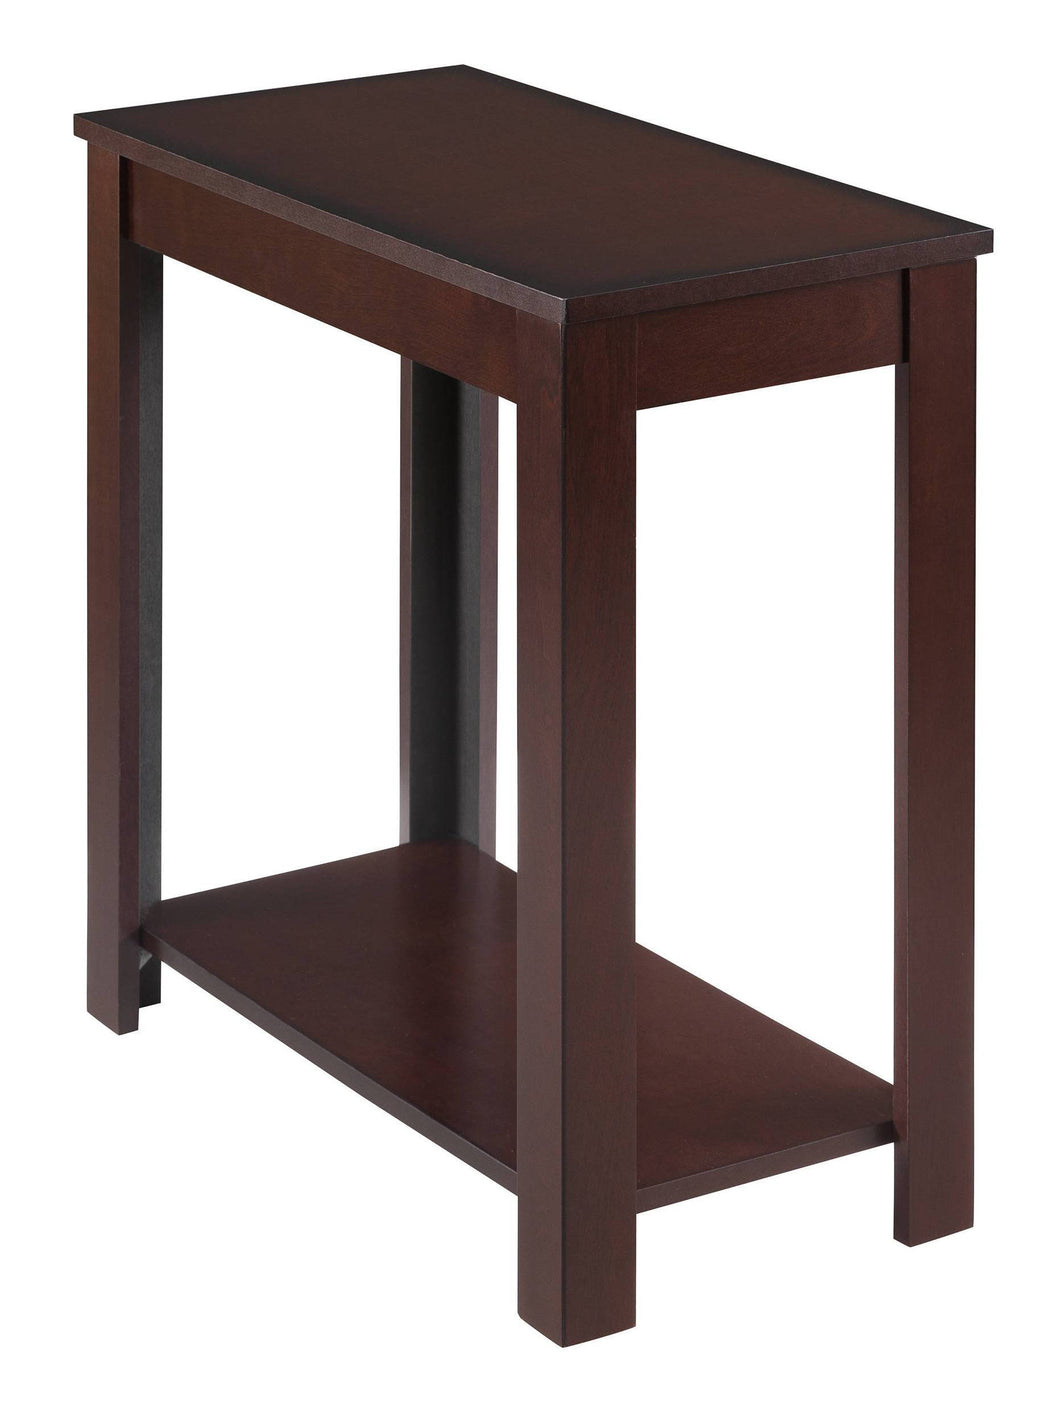 5329 Cherry Side Table $79.95